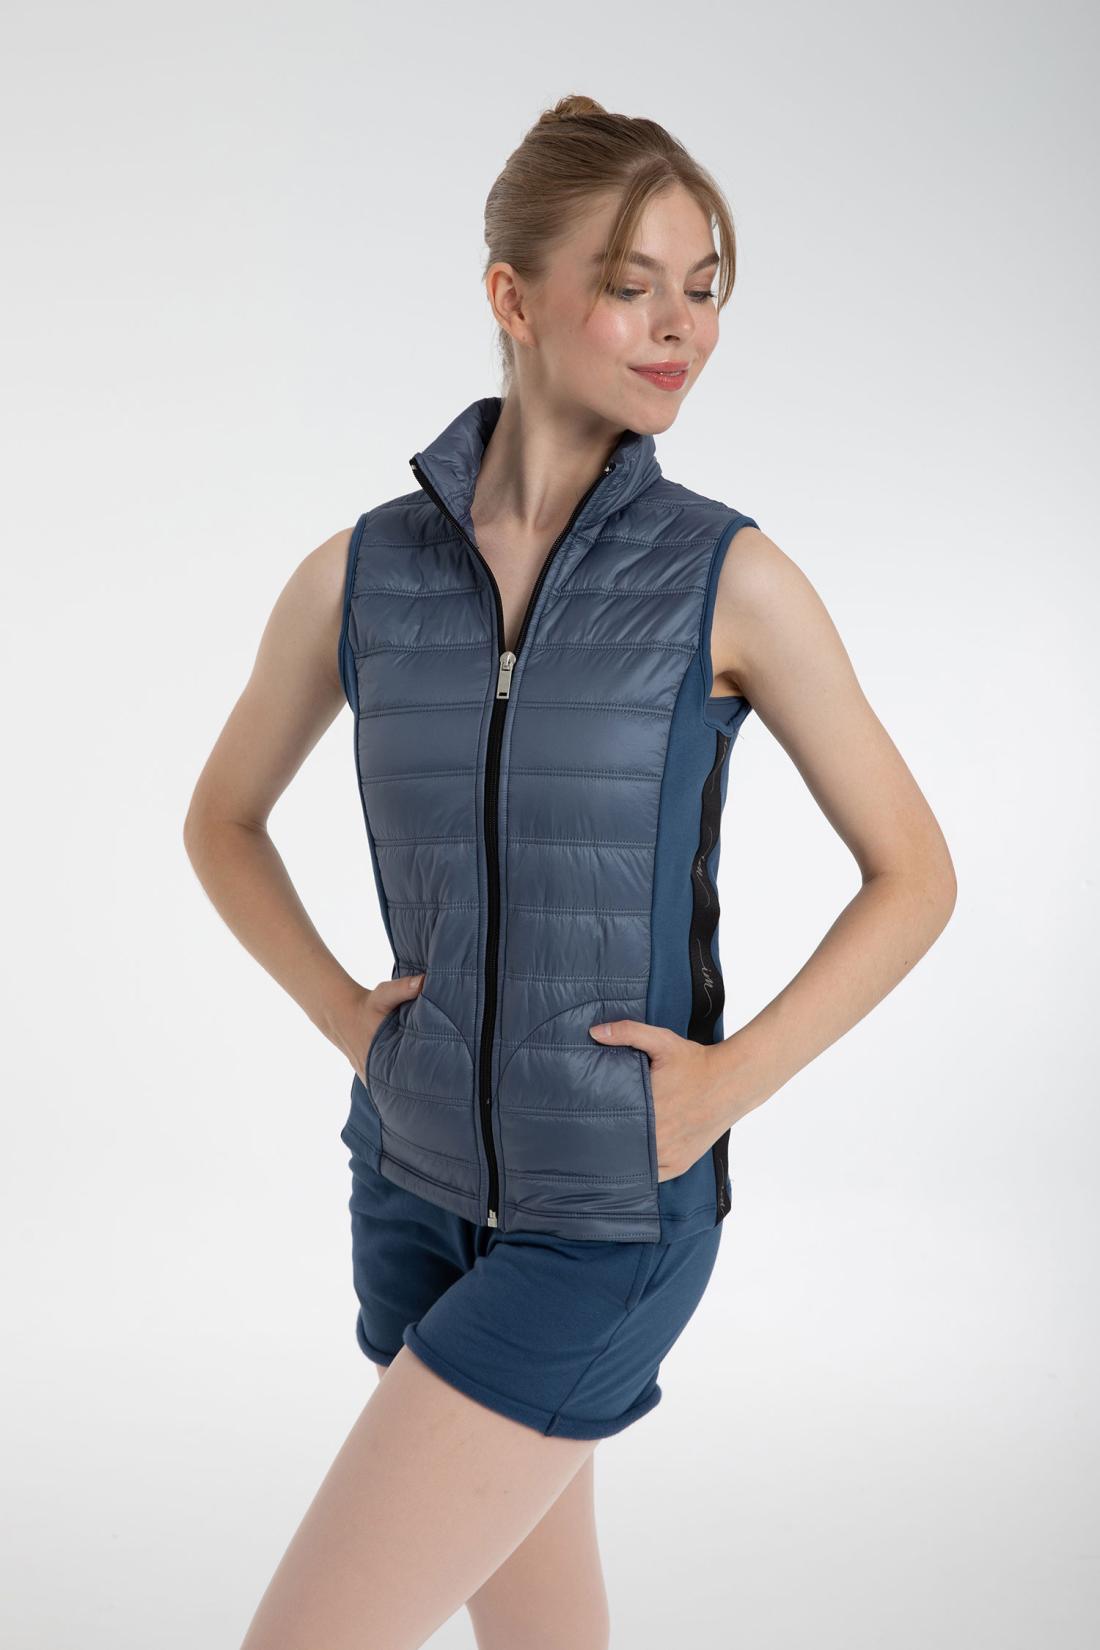 Apolo padded vest combined with plush fabric Intermezzo ballet dance skating